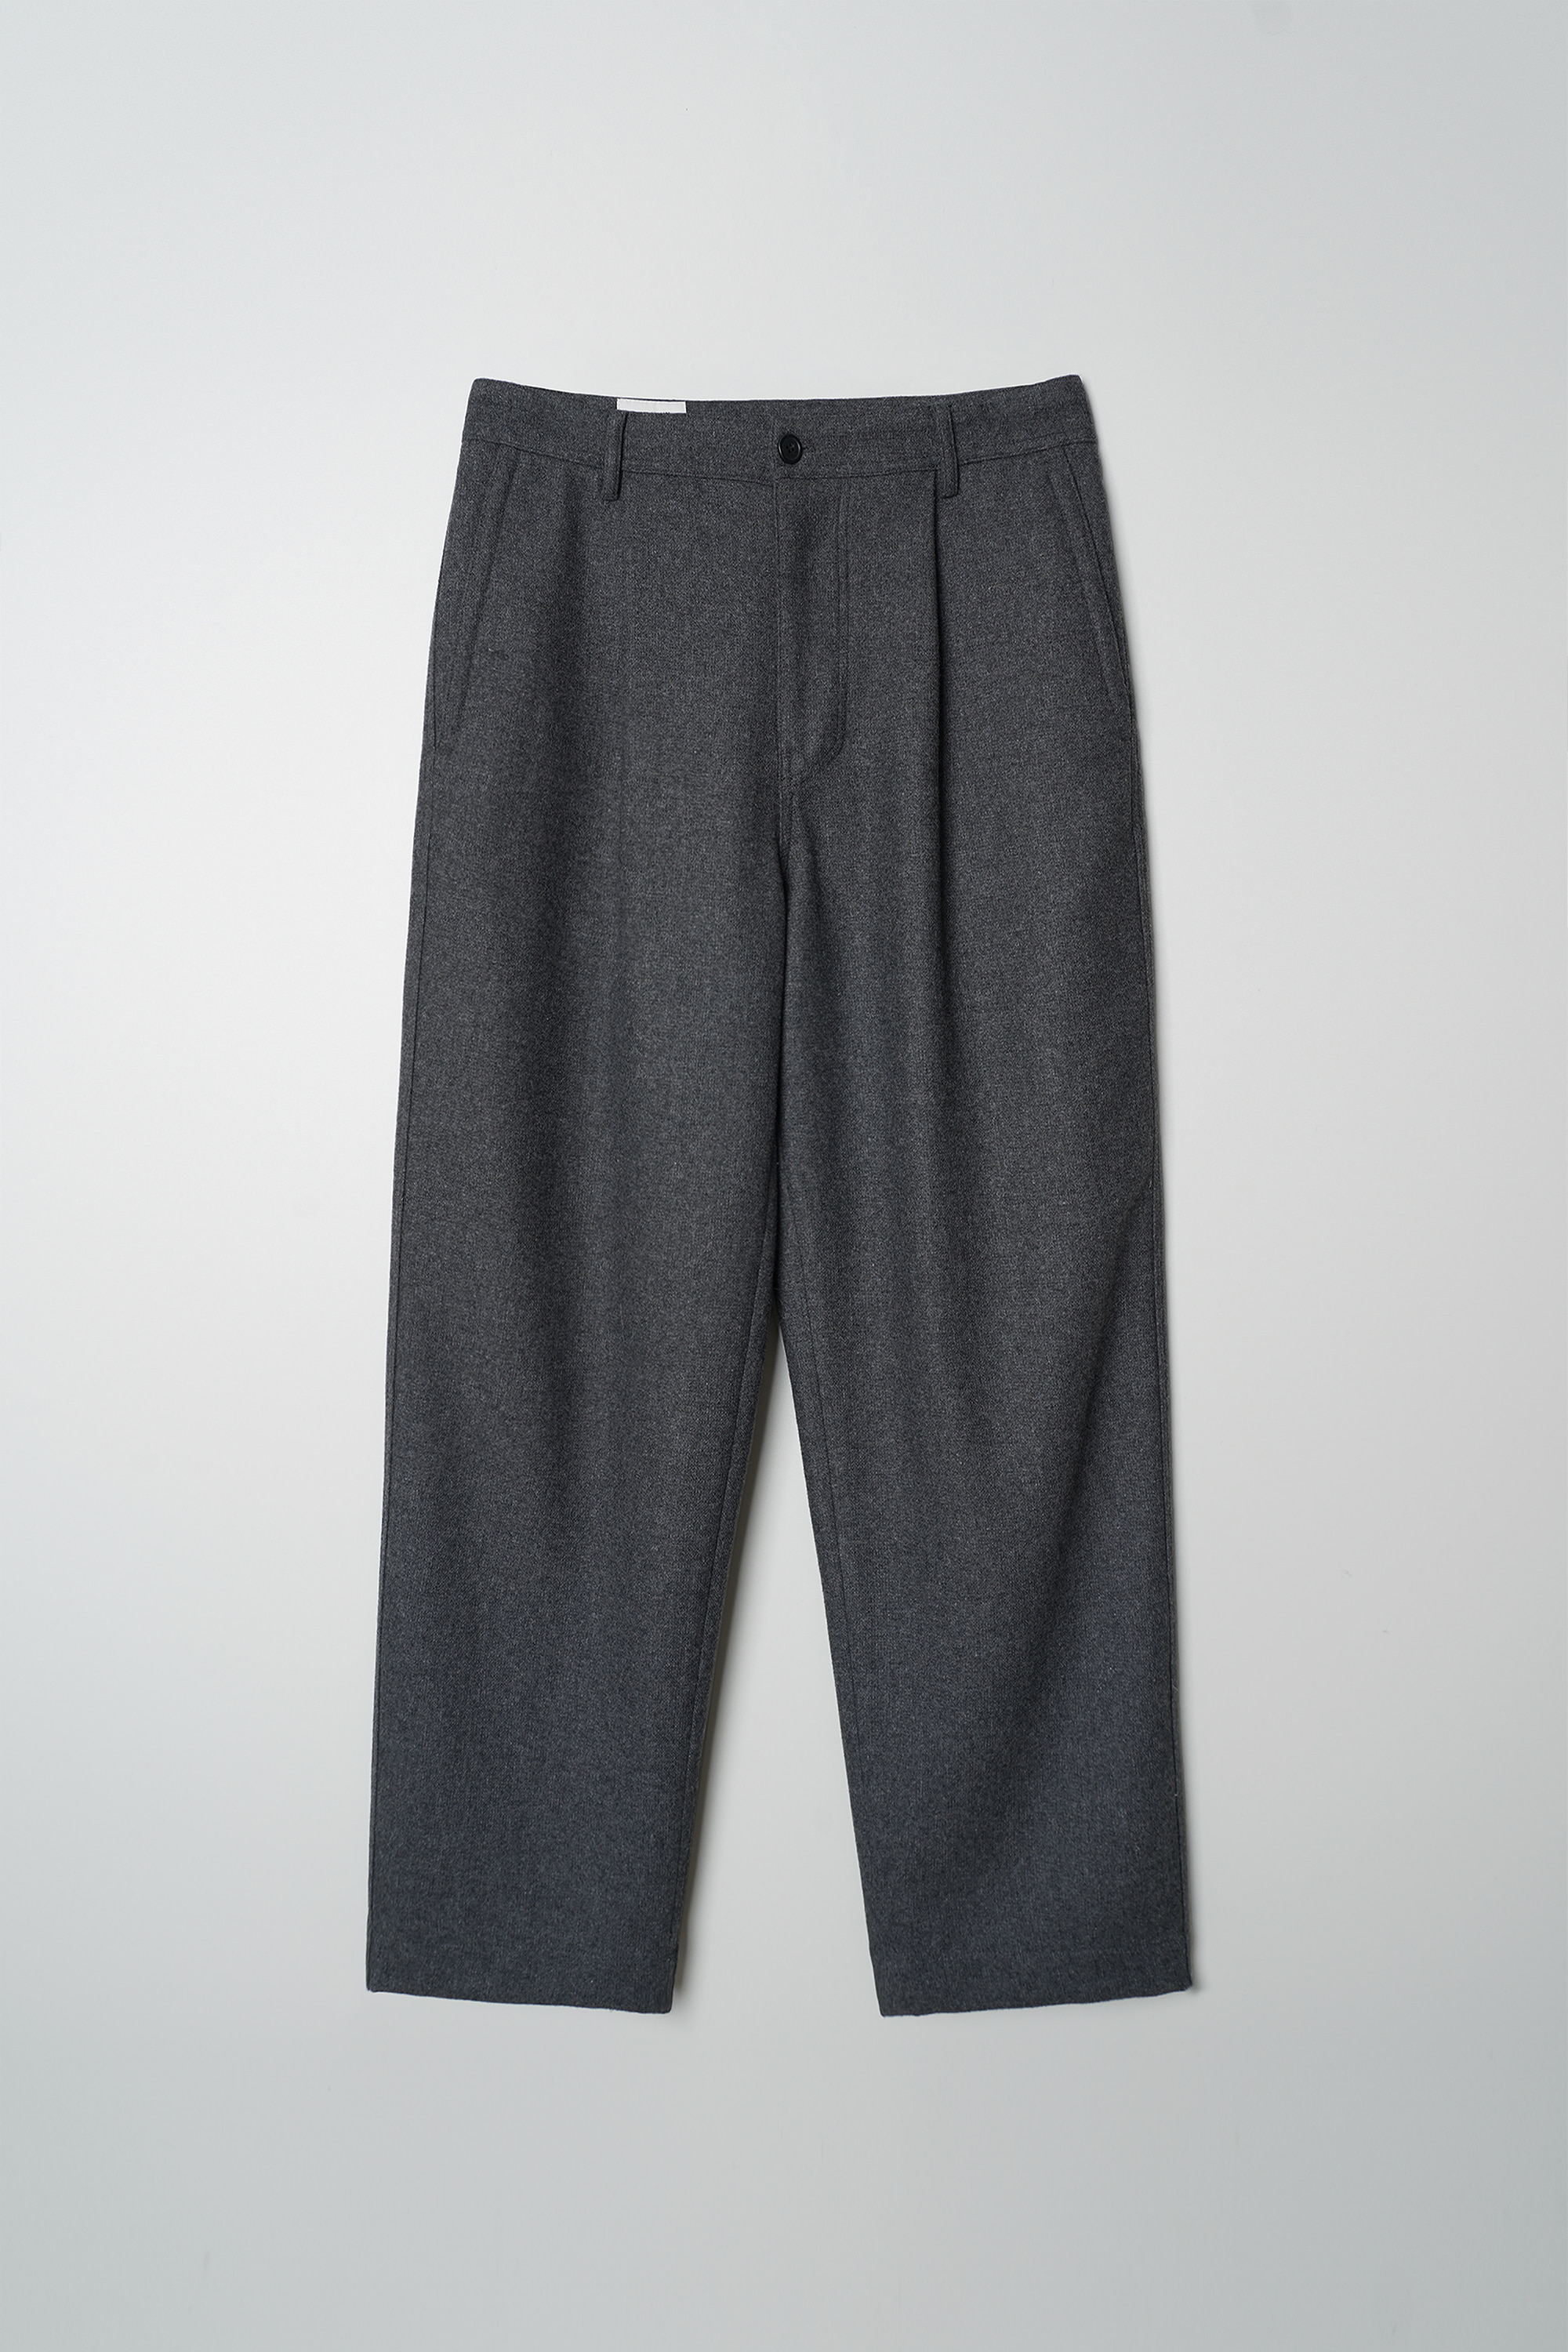 STRUCTURED WOOL PANTS - GREY